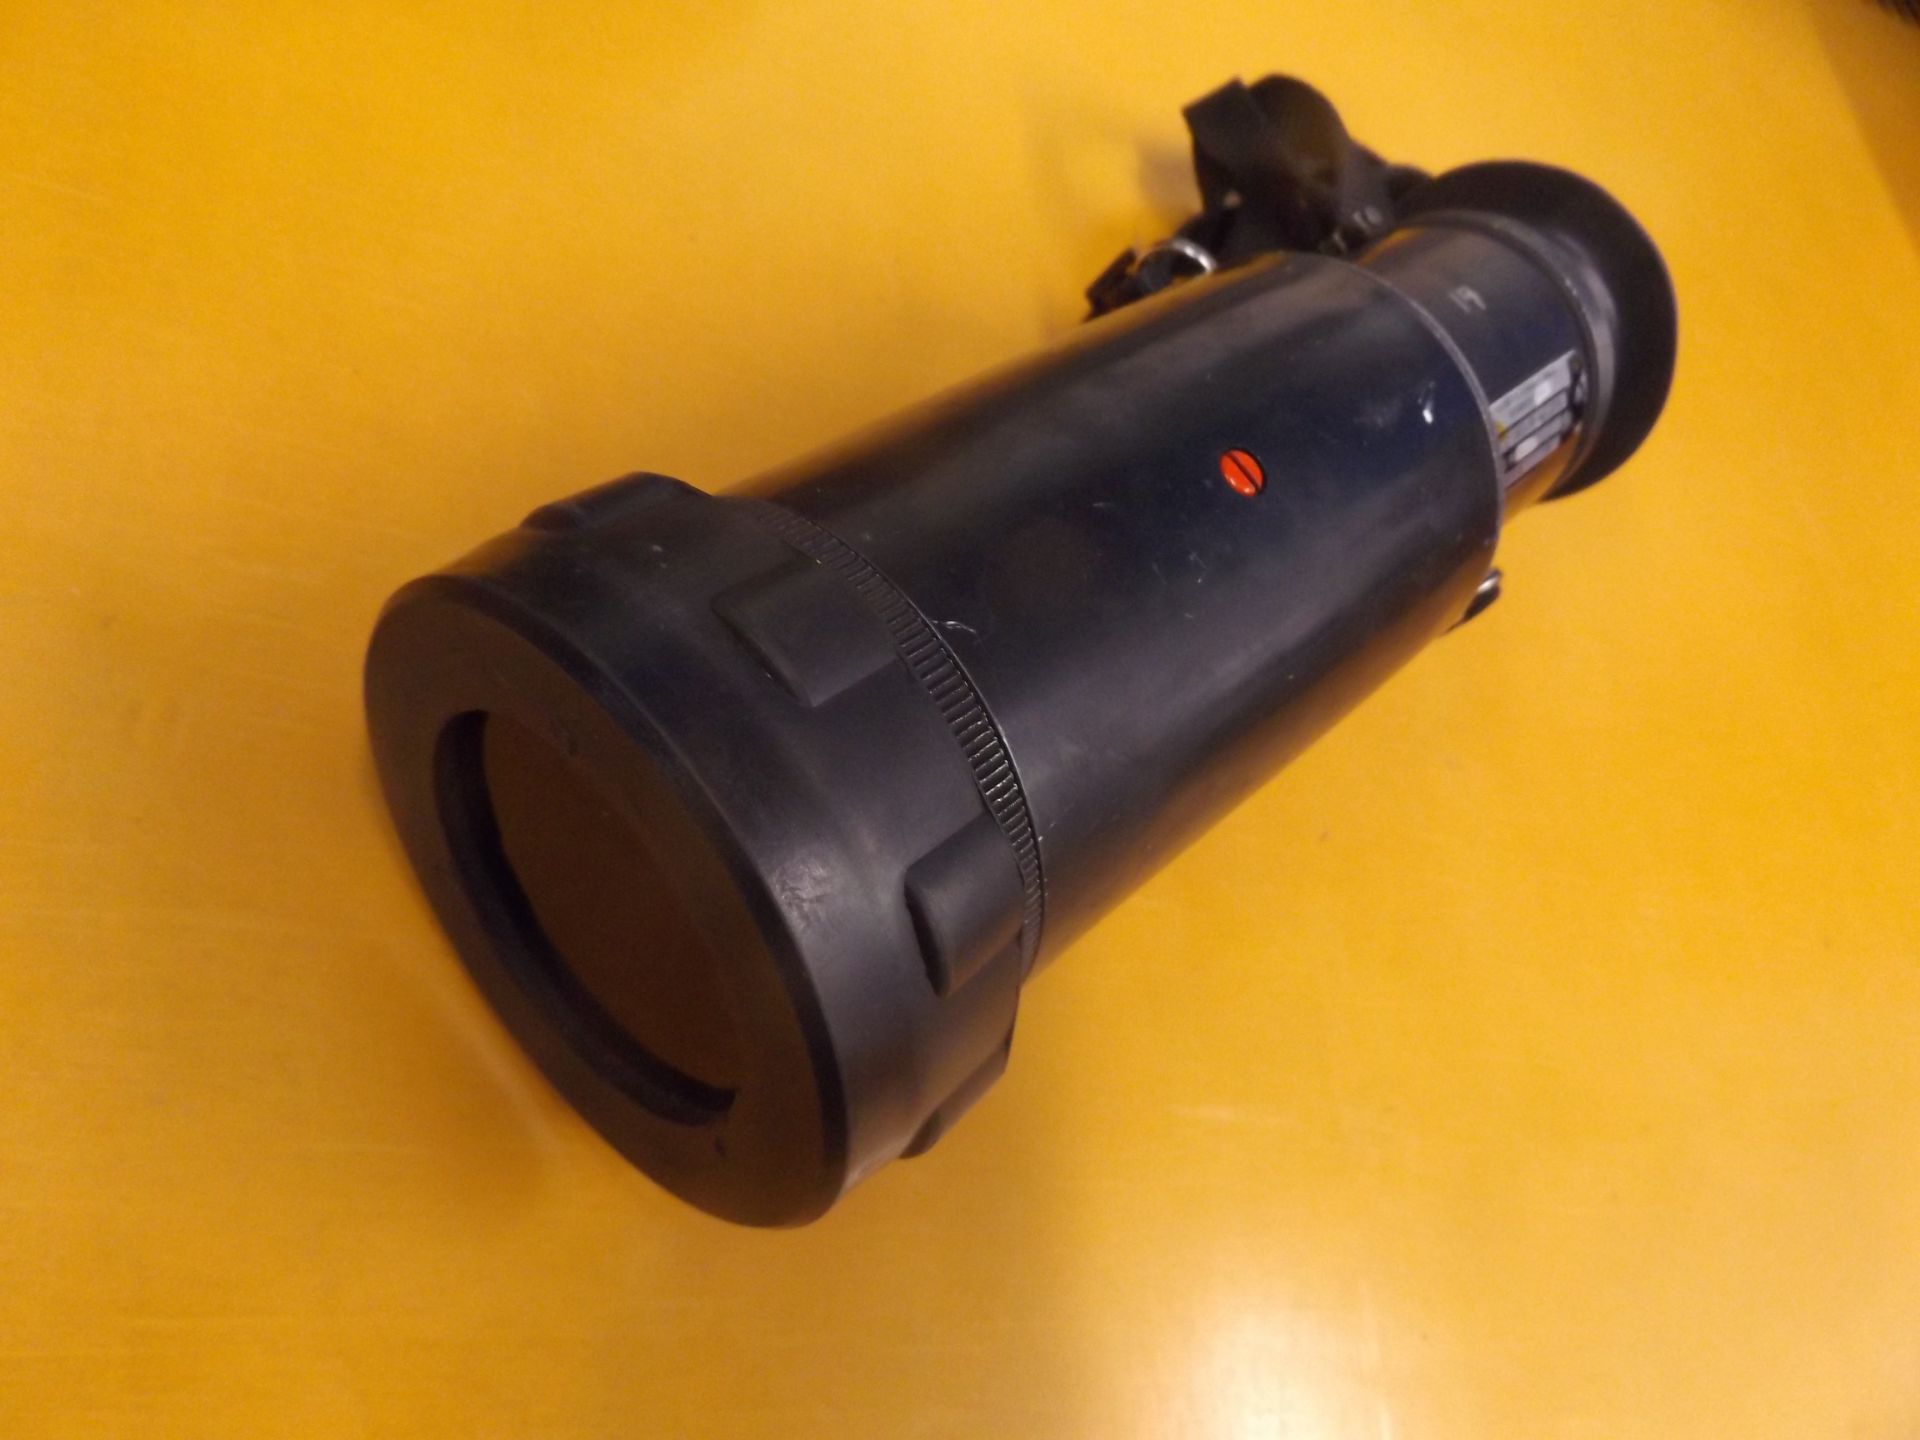 Telescope Straight Image Intensified L6A1 Scope - British Military Night Vision Pocket Scope - Image 2 of 8